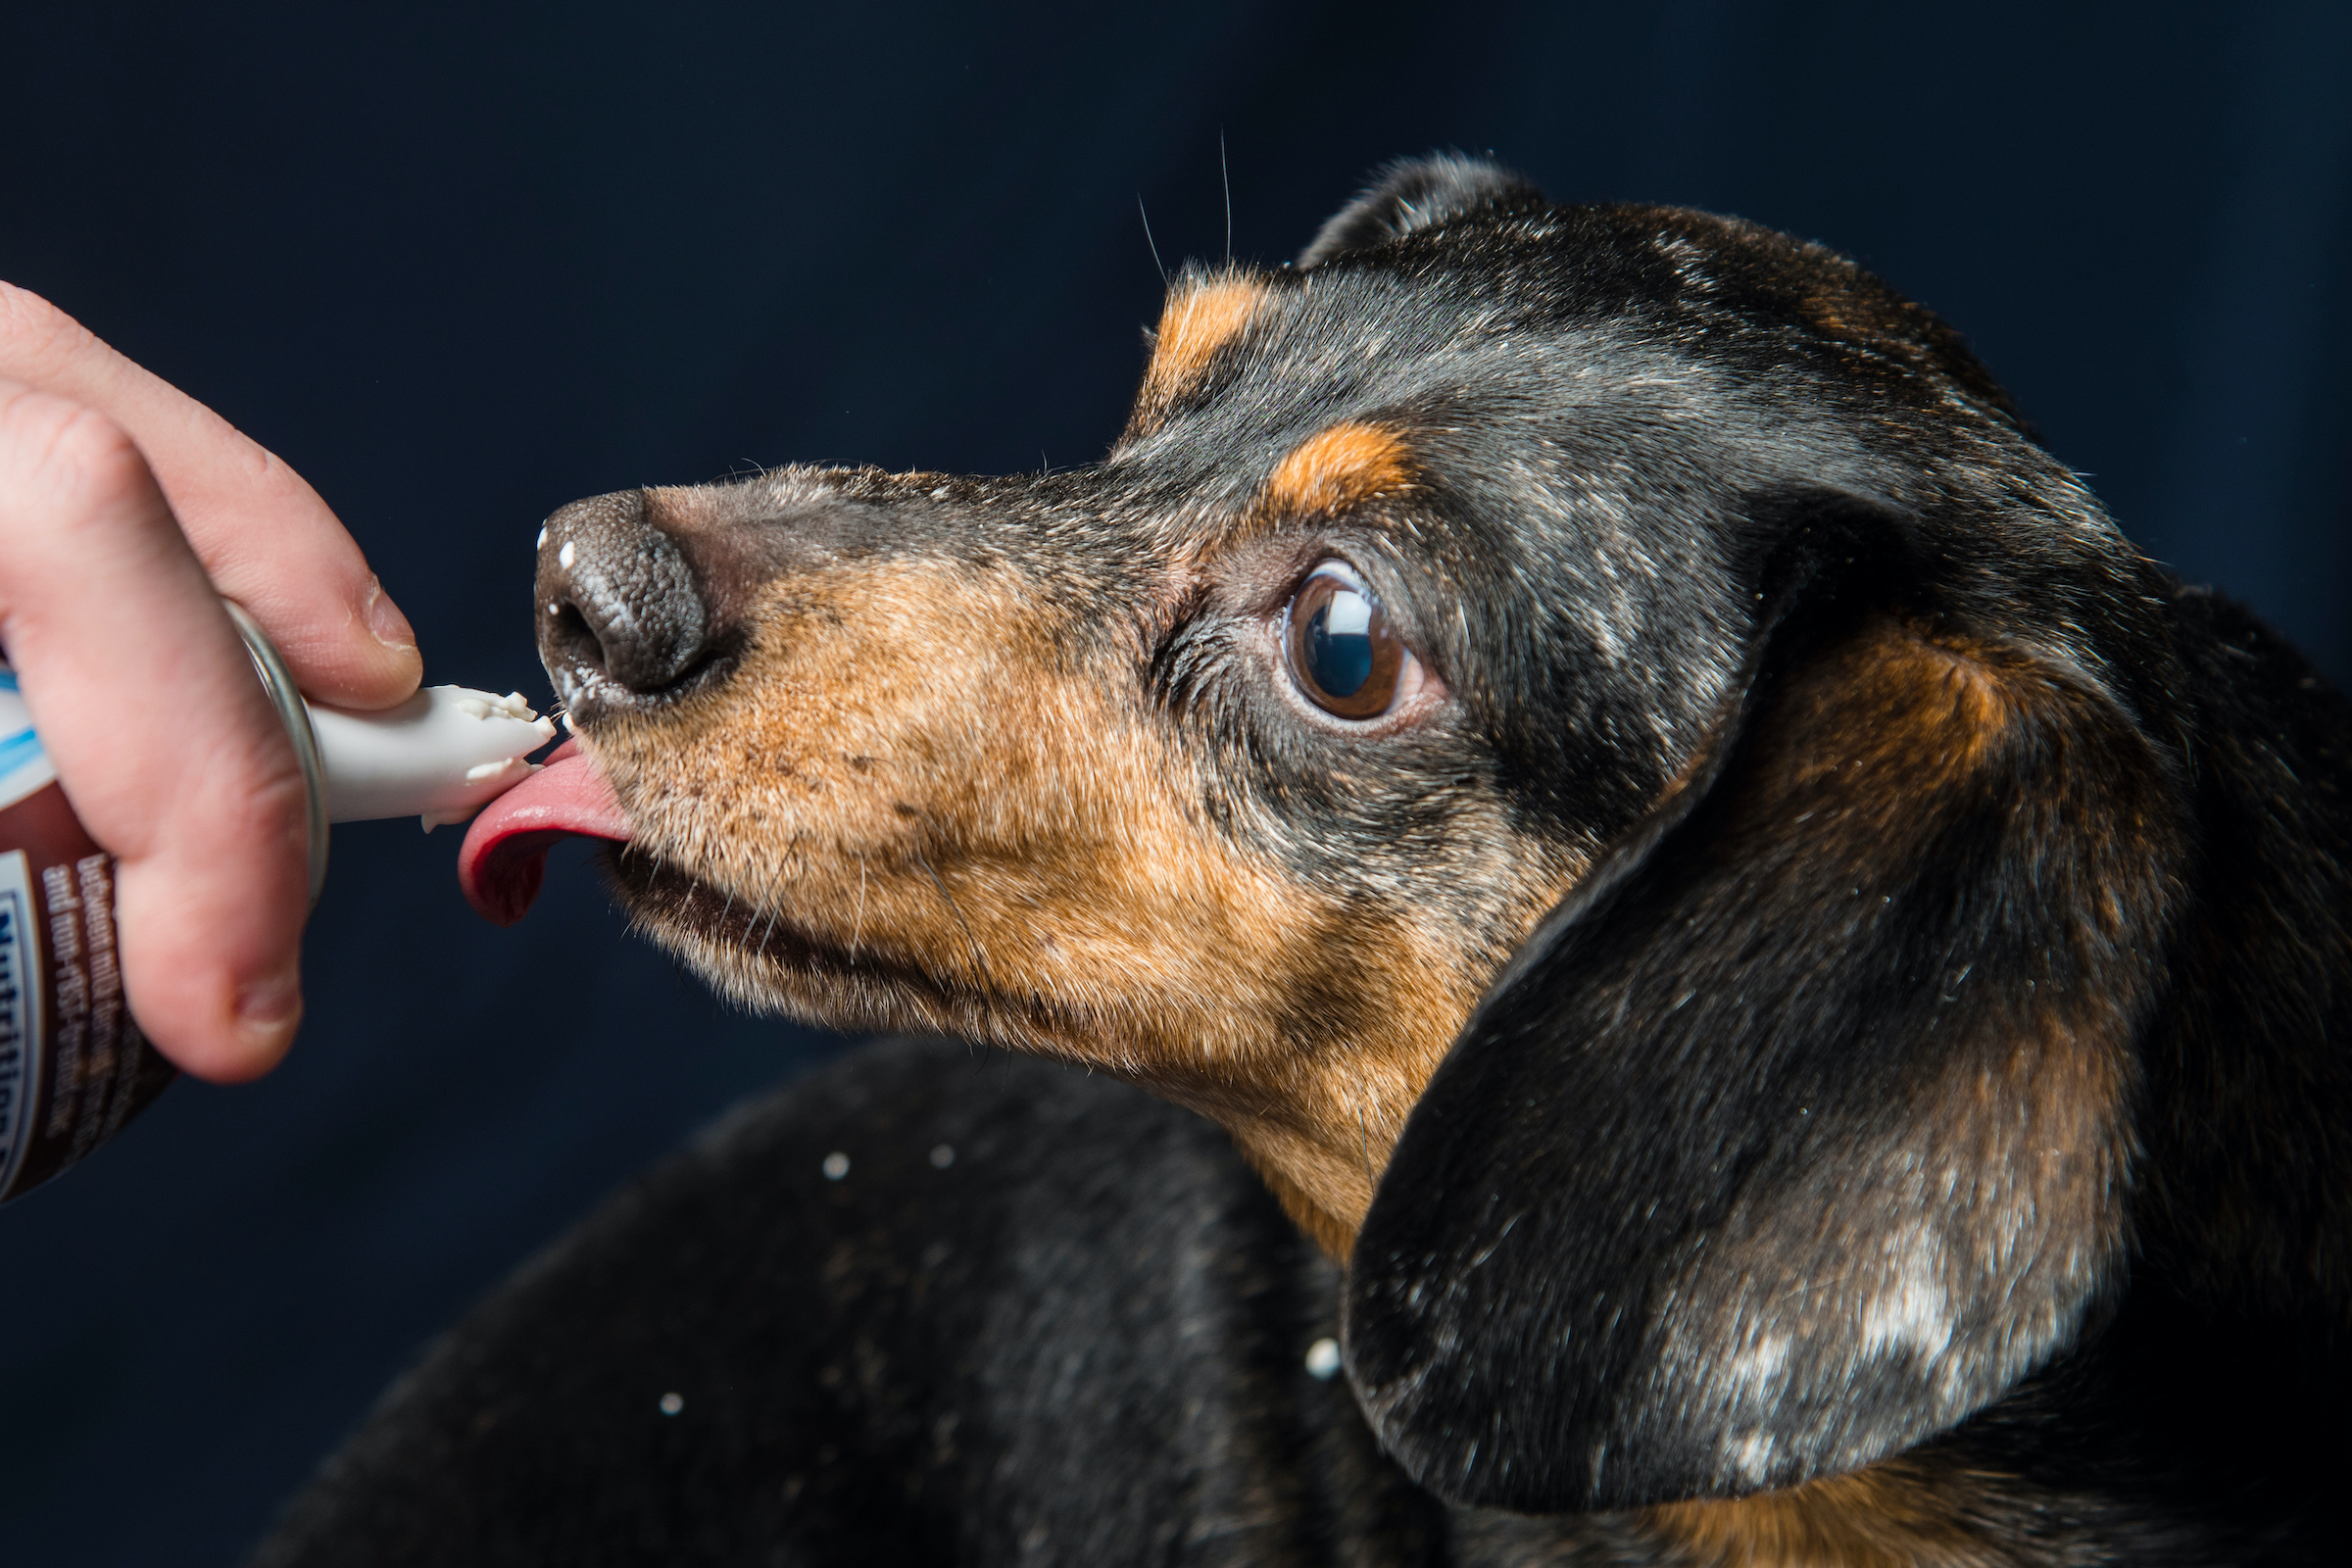 A Ddchshund stands in front of a black background and licks whipped cream from a canister someone holds